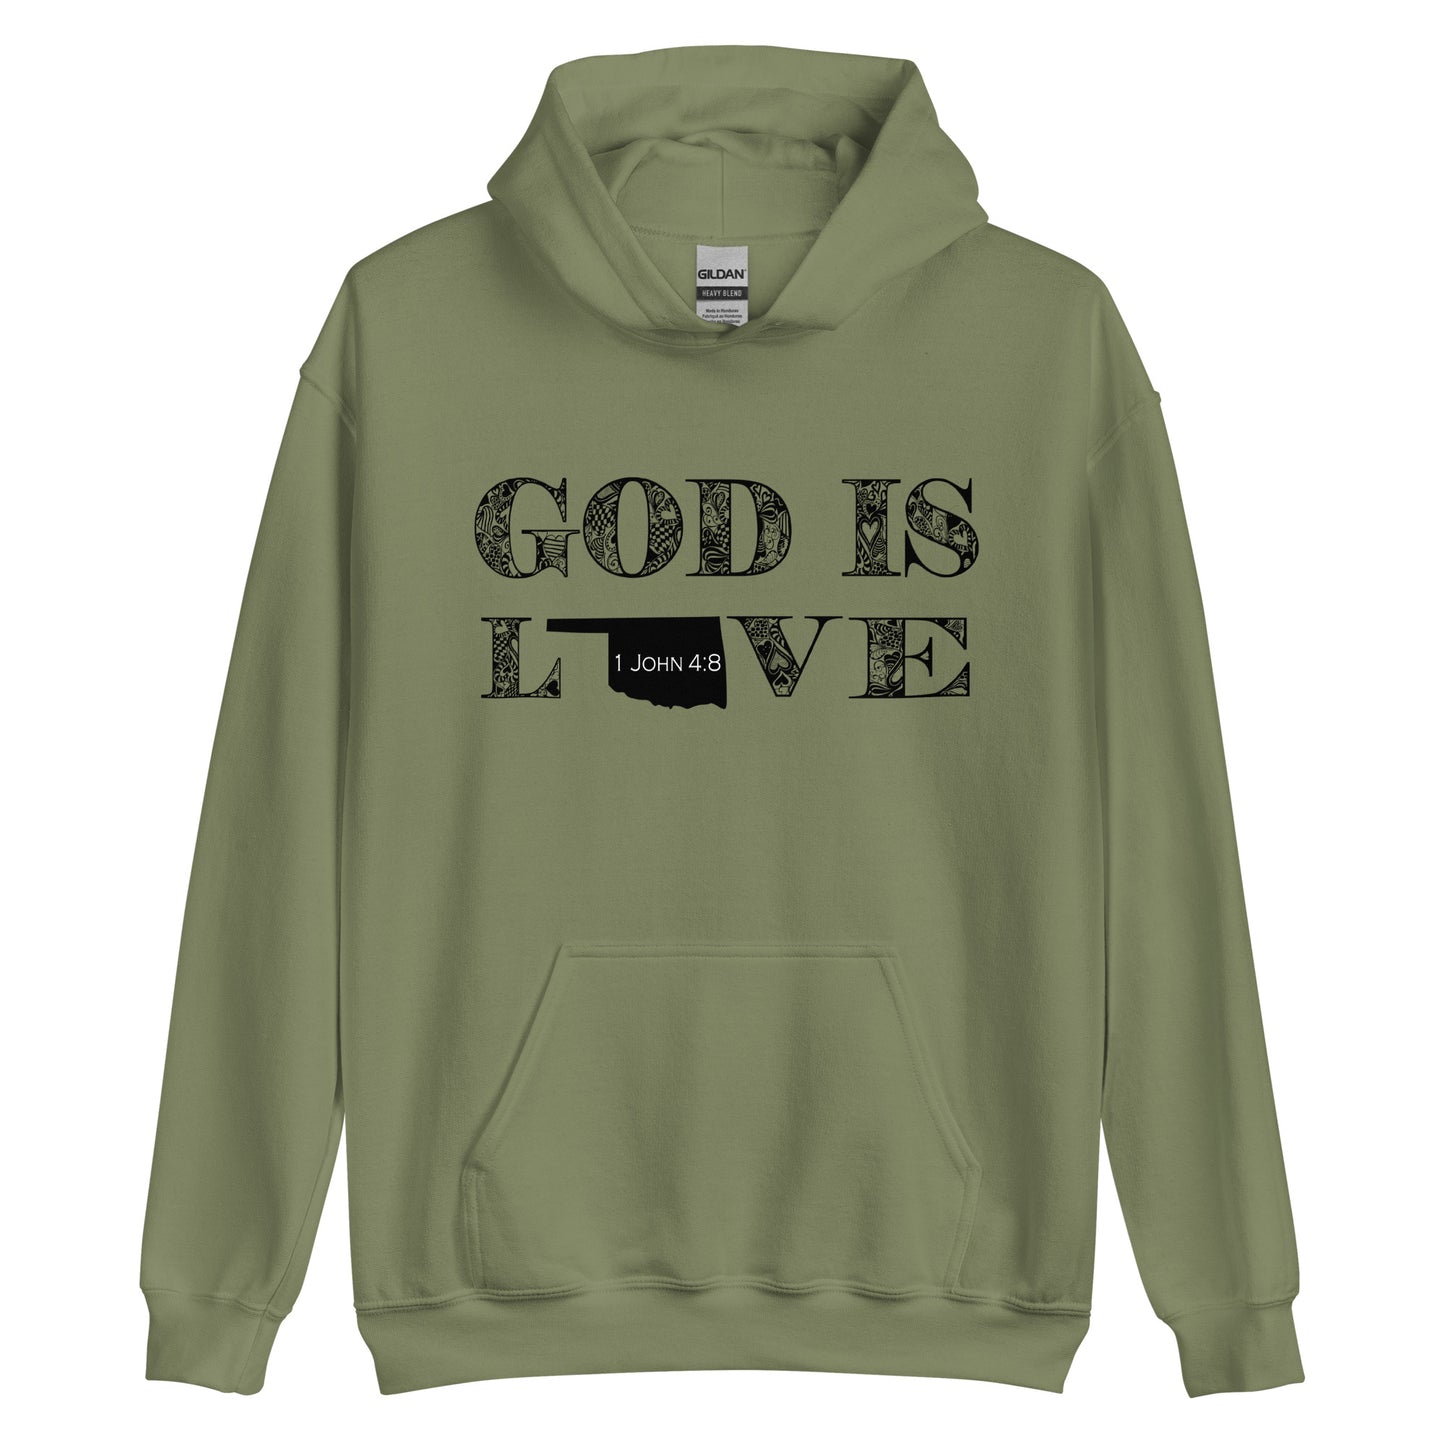 1 John 4:8 God Is Love Unisex Oklahoma Hoodie in Military Green - front view with hood down